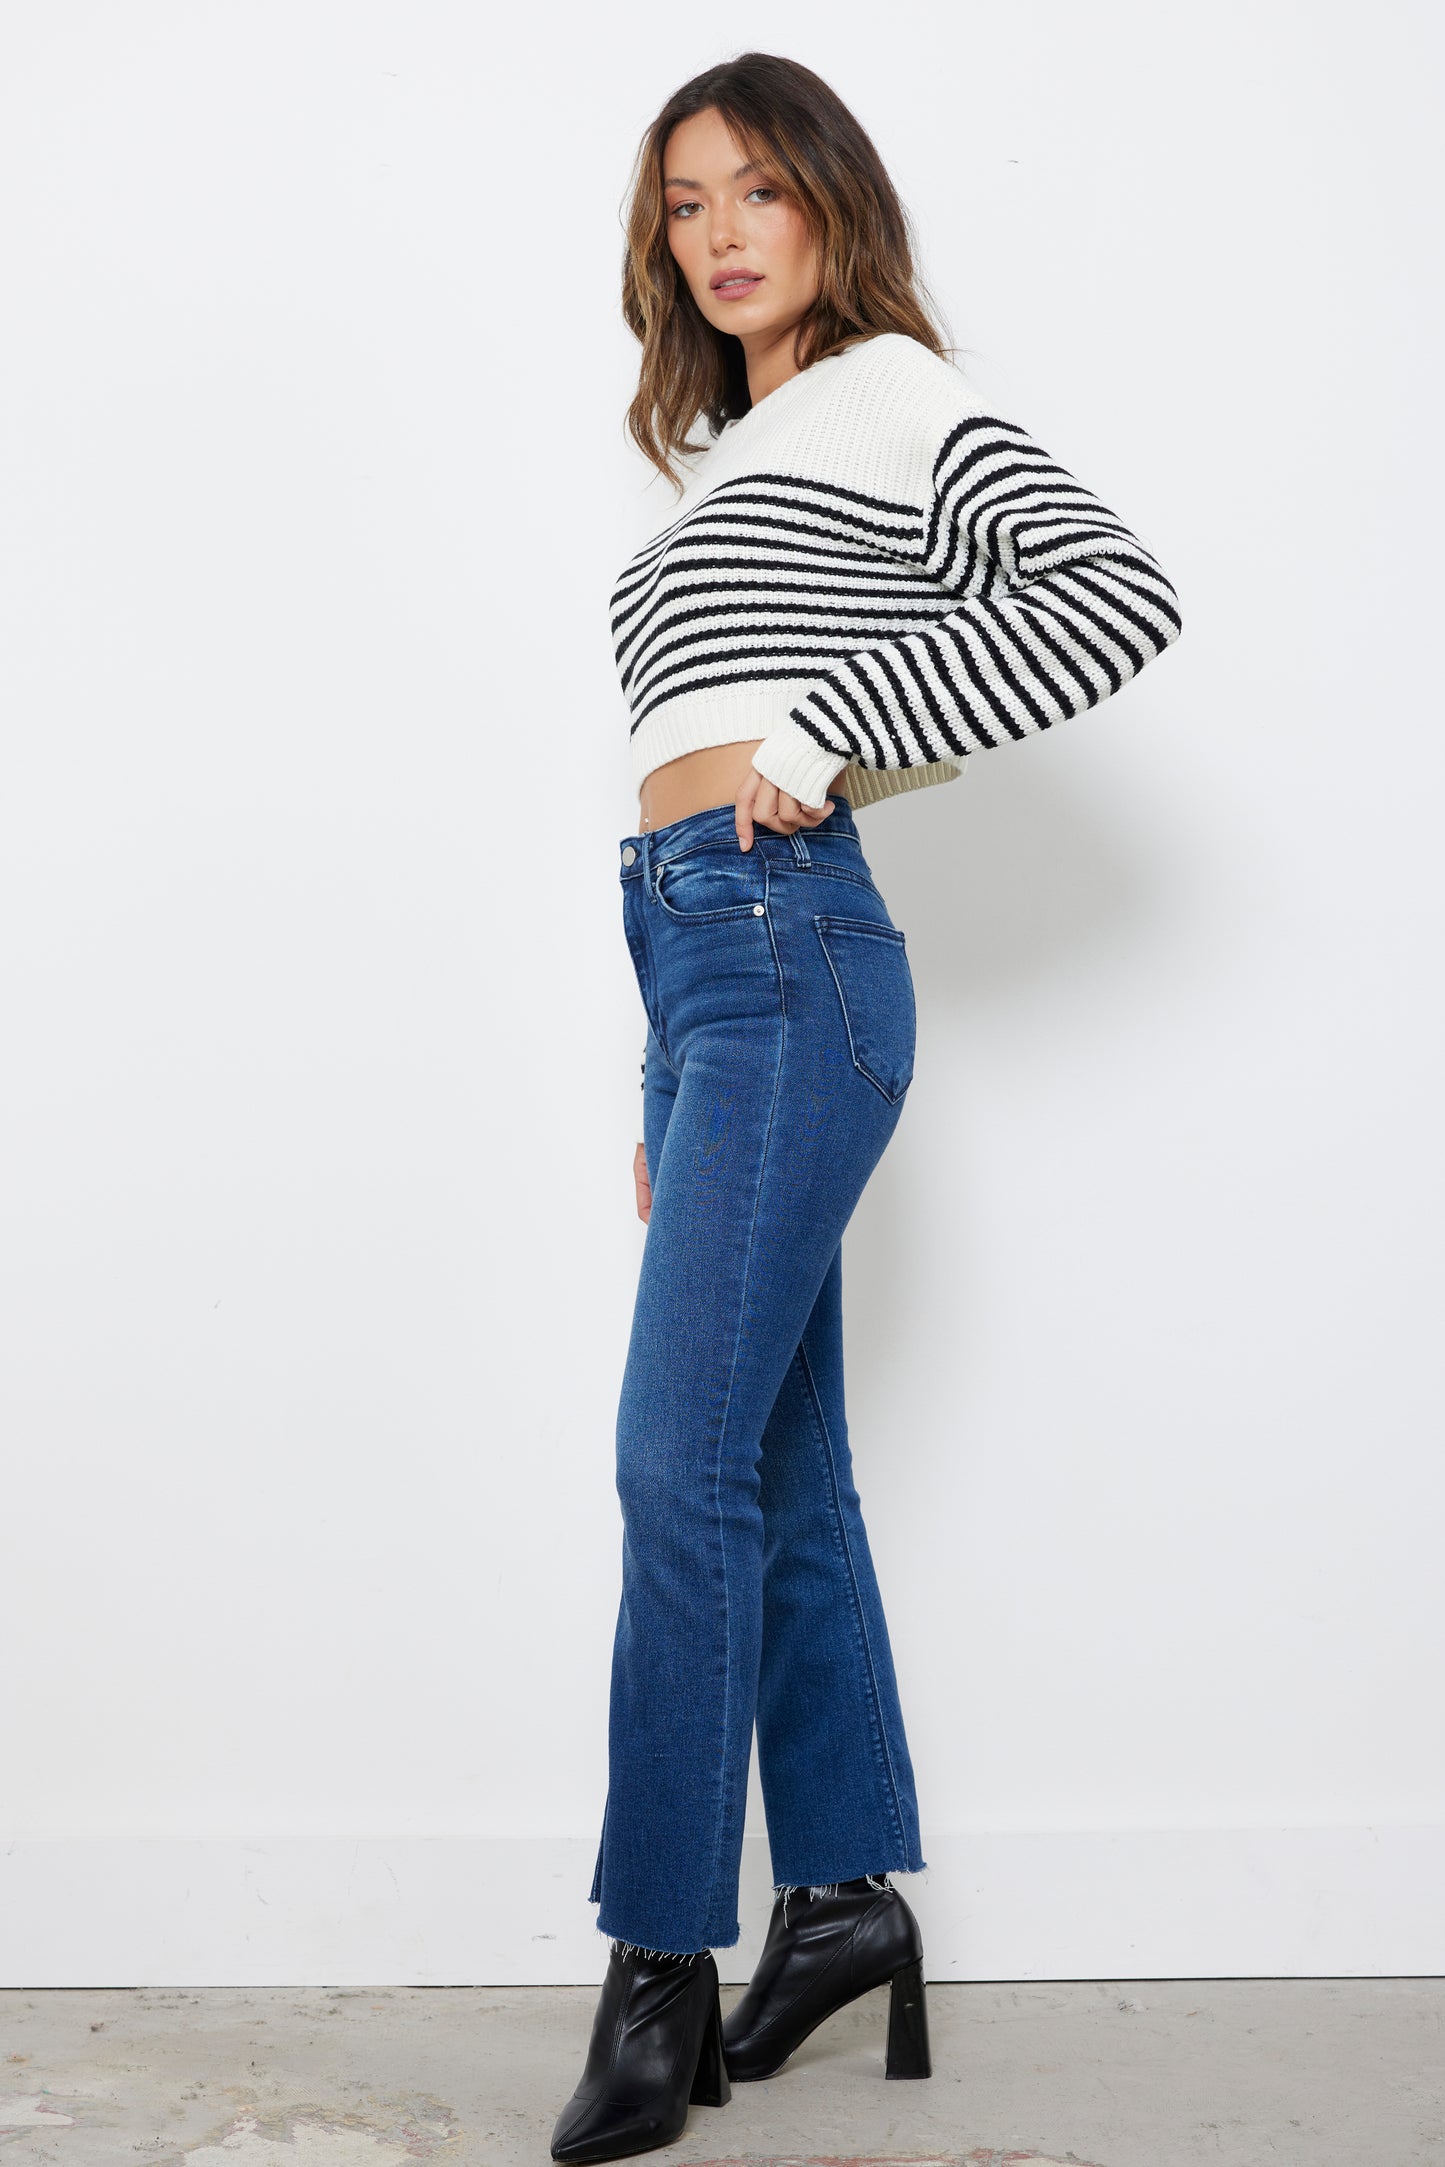 Nantucket Fall Off White Knit Top